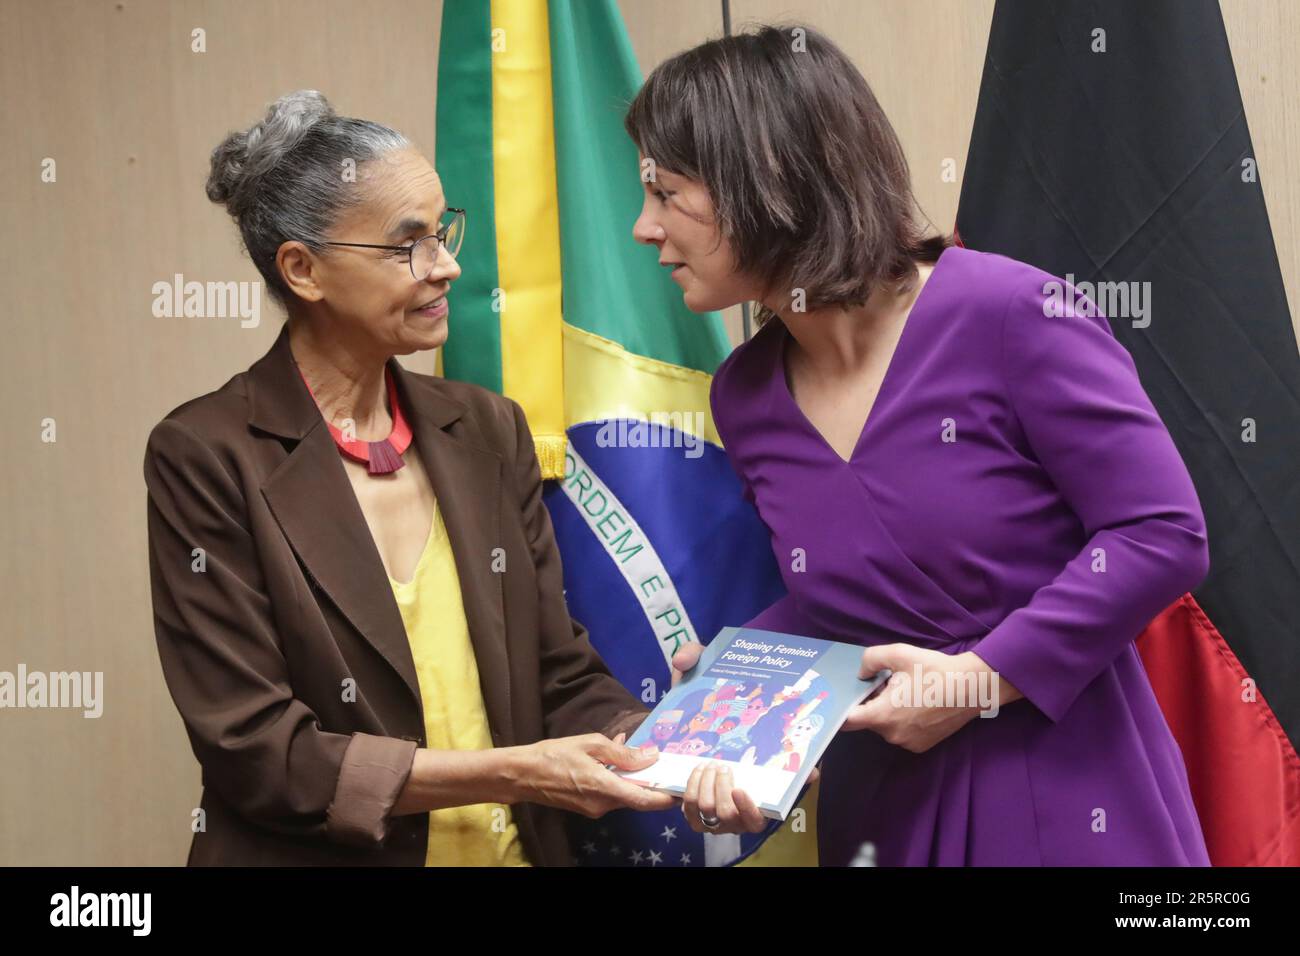 Brazilian Environment Minister Marina Silva, left, receives a book from Germany's Foreign Minister Annalena Baerbock during their meeting for talks on bilateral relations, trade and the environment in Brasilia, Brazil, Monday, June 5, 2023. (AP Photo/Gustavo Moreno) Stock Photo